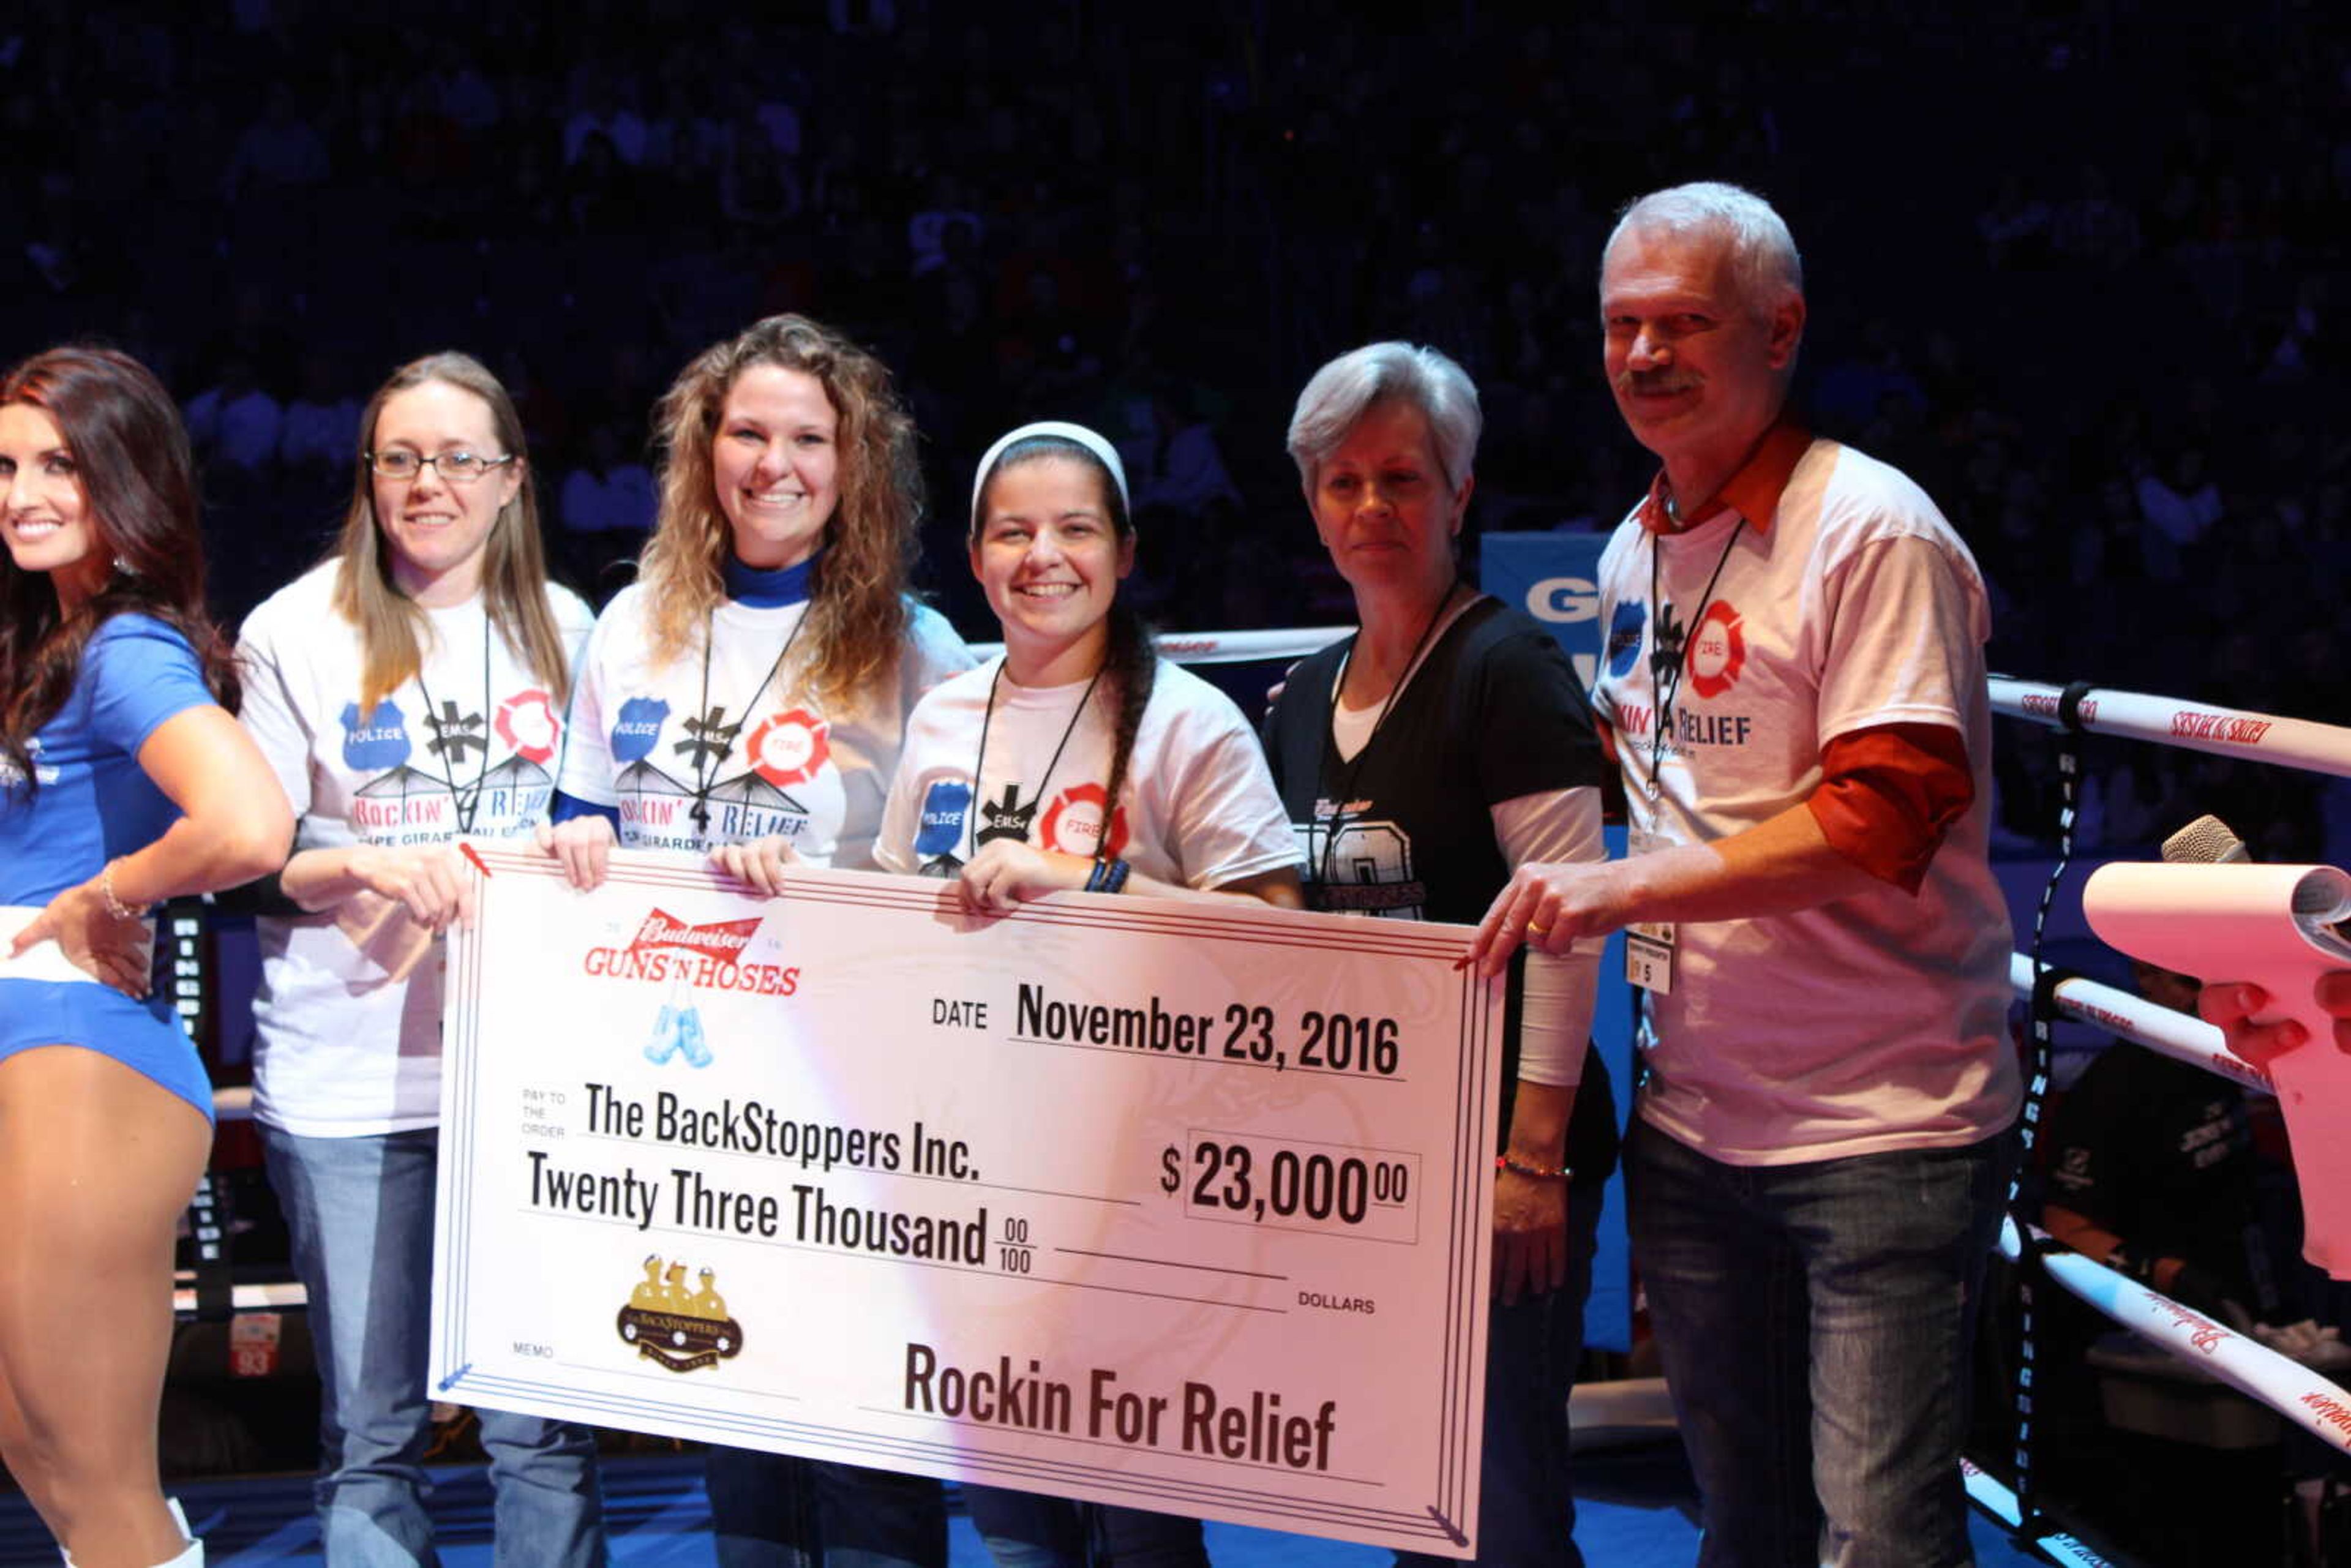 From left to right Carolyn Curtis, Carly Howell, Jennifer Rubin, Jacqueline Bettale and Al Spener present a check for $23,000 from Rockin’ 4 Relief at Guns ‘N Hoses on Nov. 23.